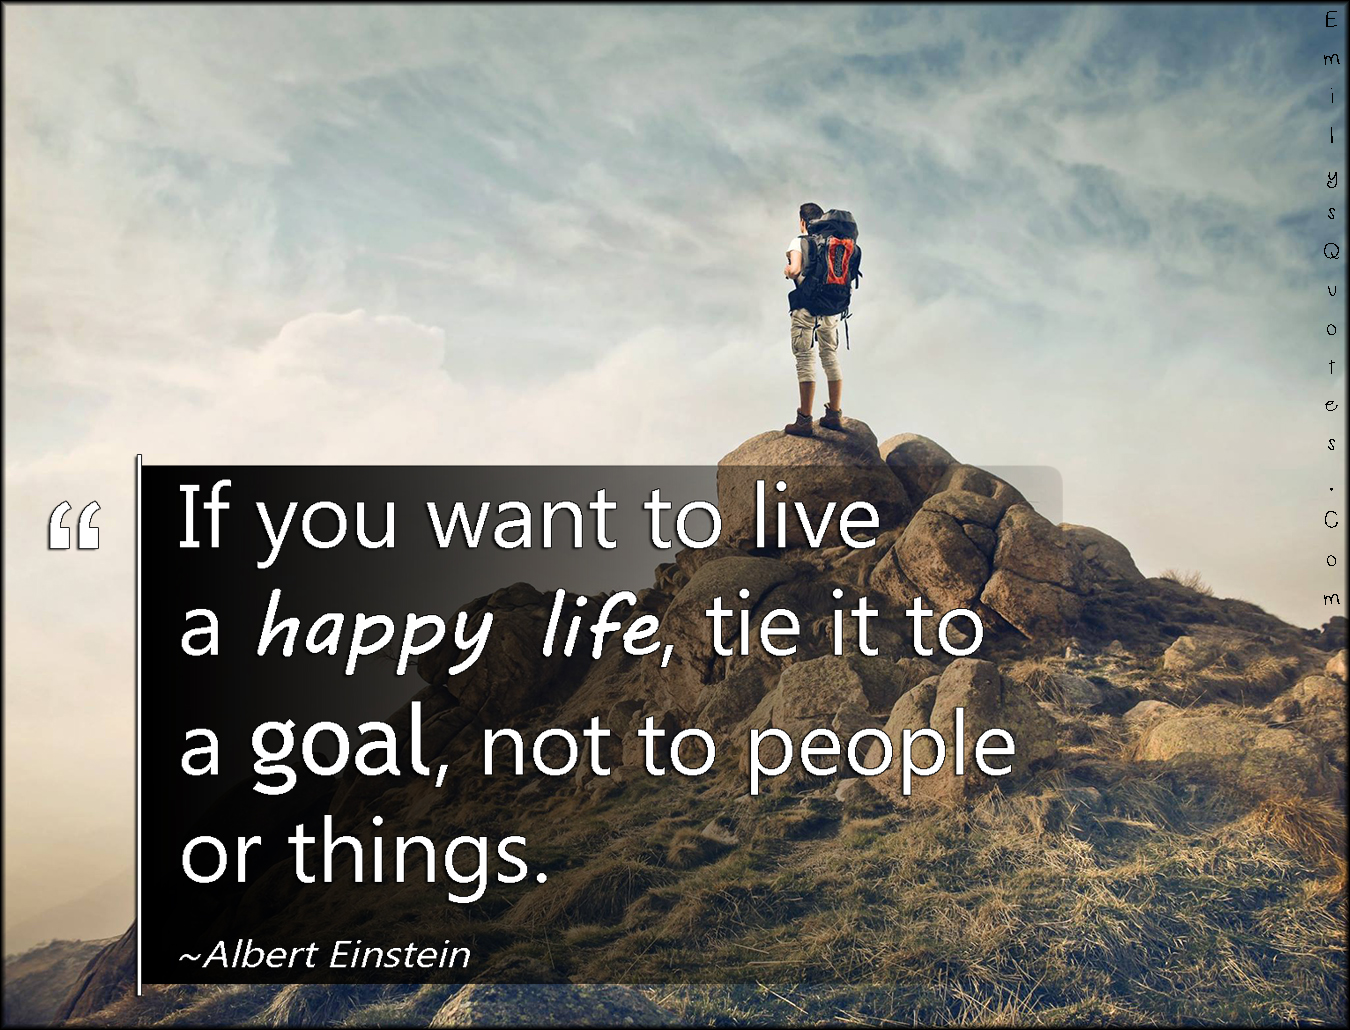 If you want to live a happy life, tie it to a goal, not to people or things